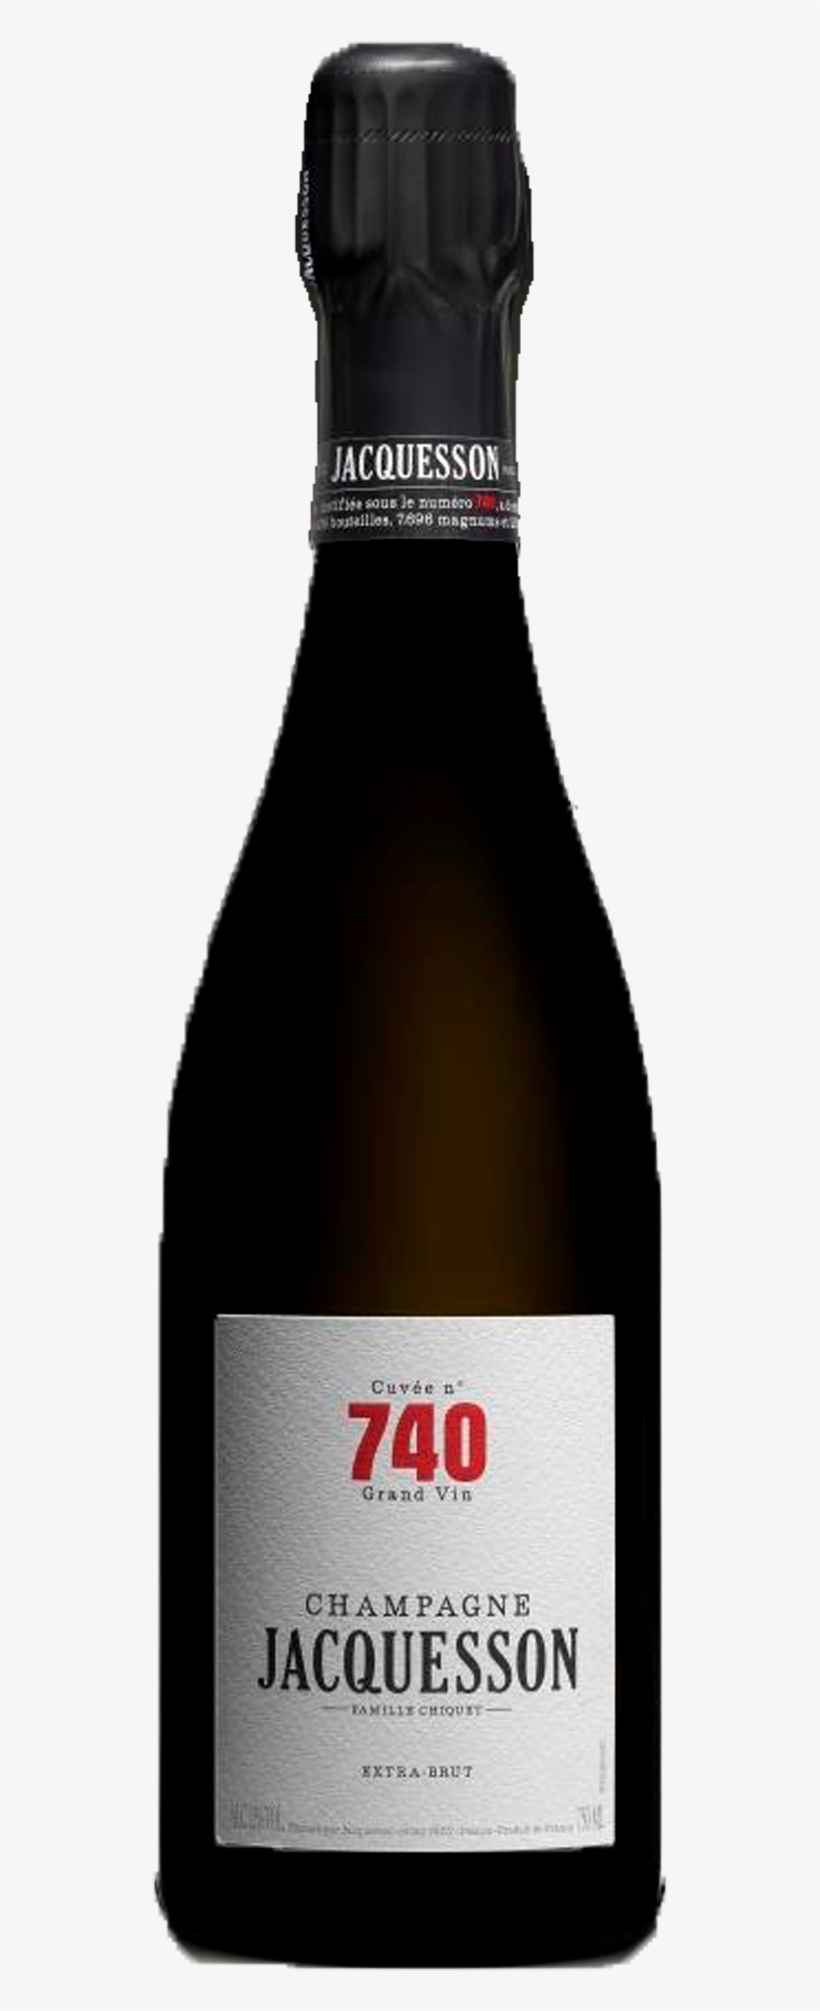 Wonderfully Elegant With A Nice Touch Of Toast And - Jacquesson Cuvee 740 Extra Brut 2017, transparent png #6010243